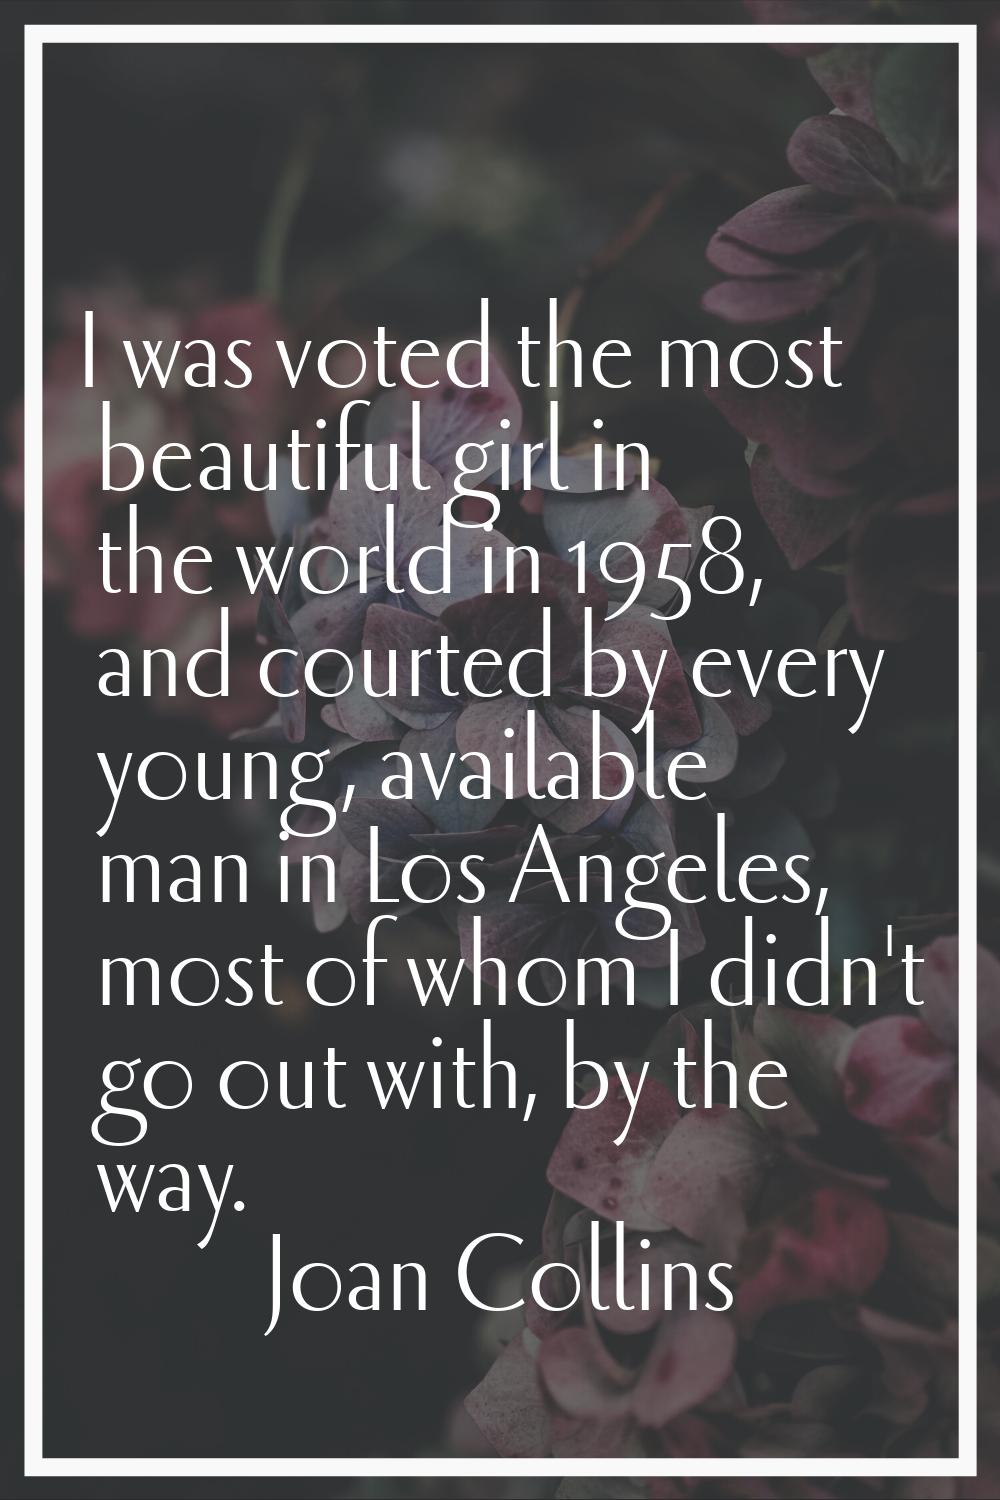 I was voted the most beautiful girl in the world in 1958, and courted by every young, available man